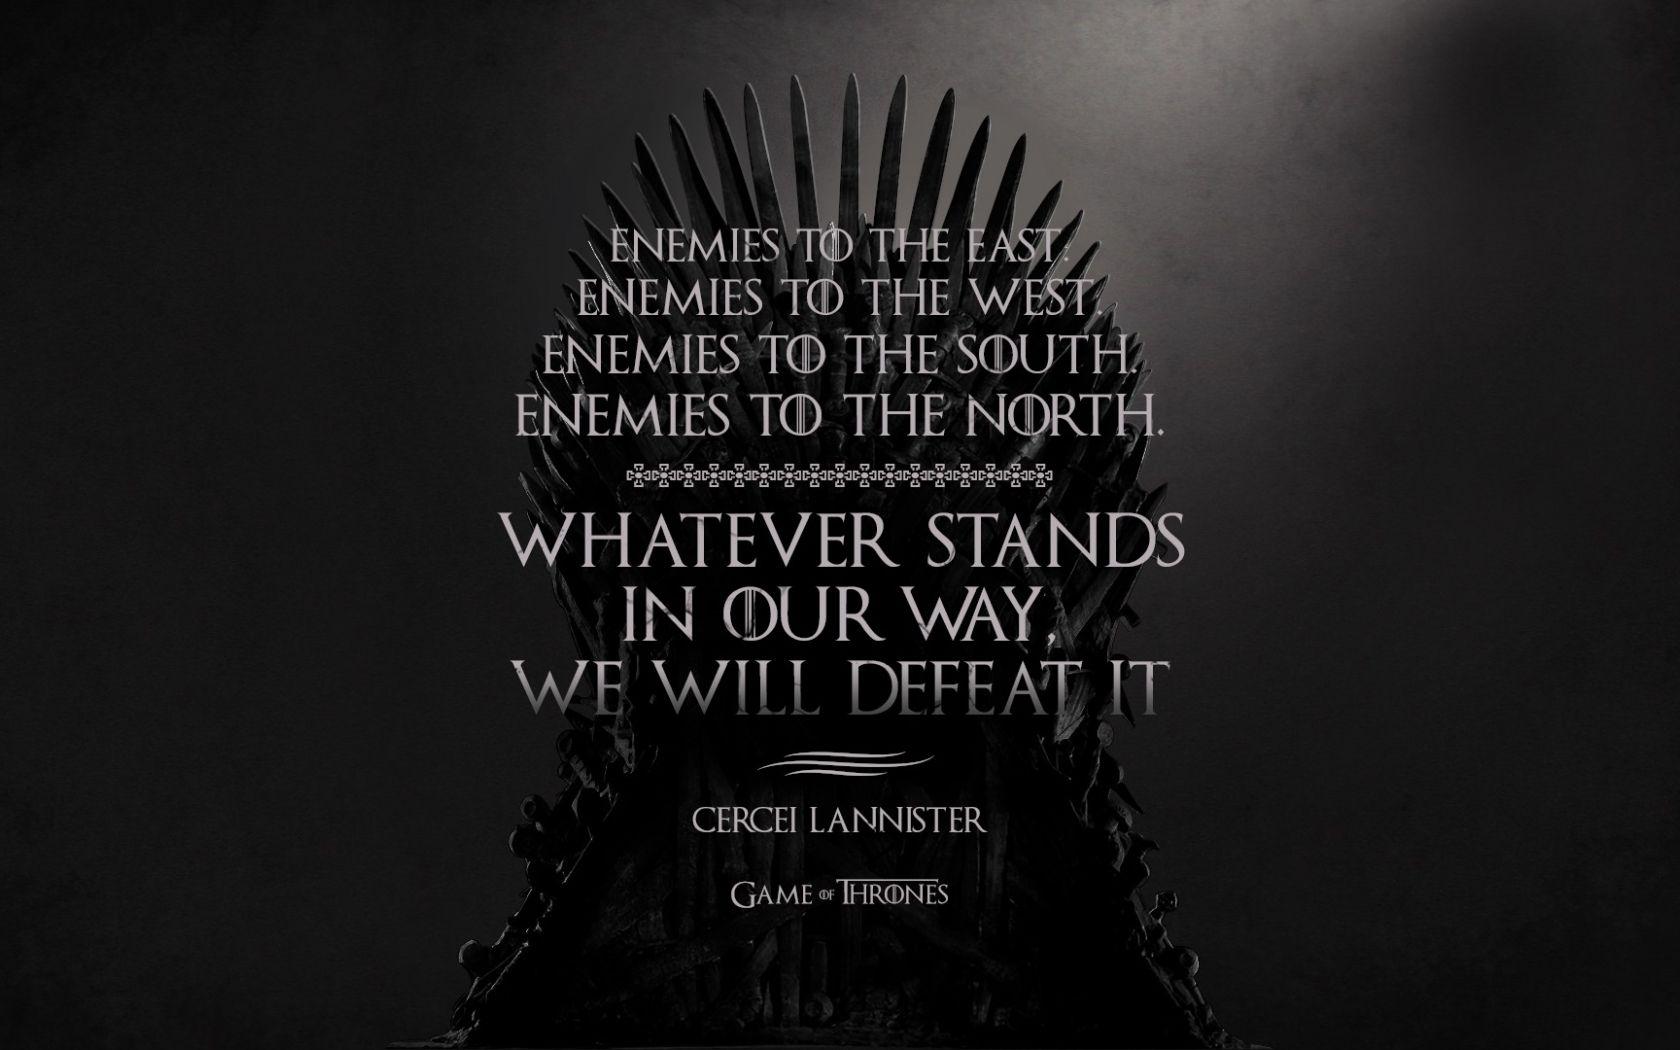 tyrion lannister quotes wallpaper